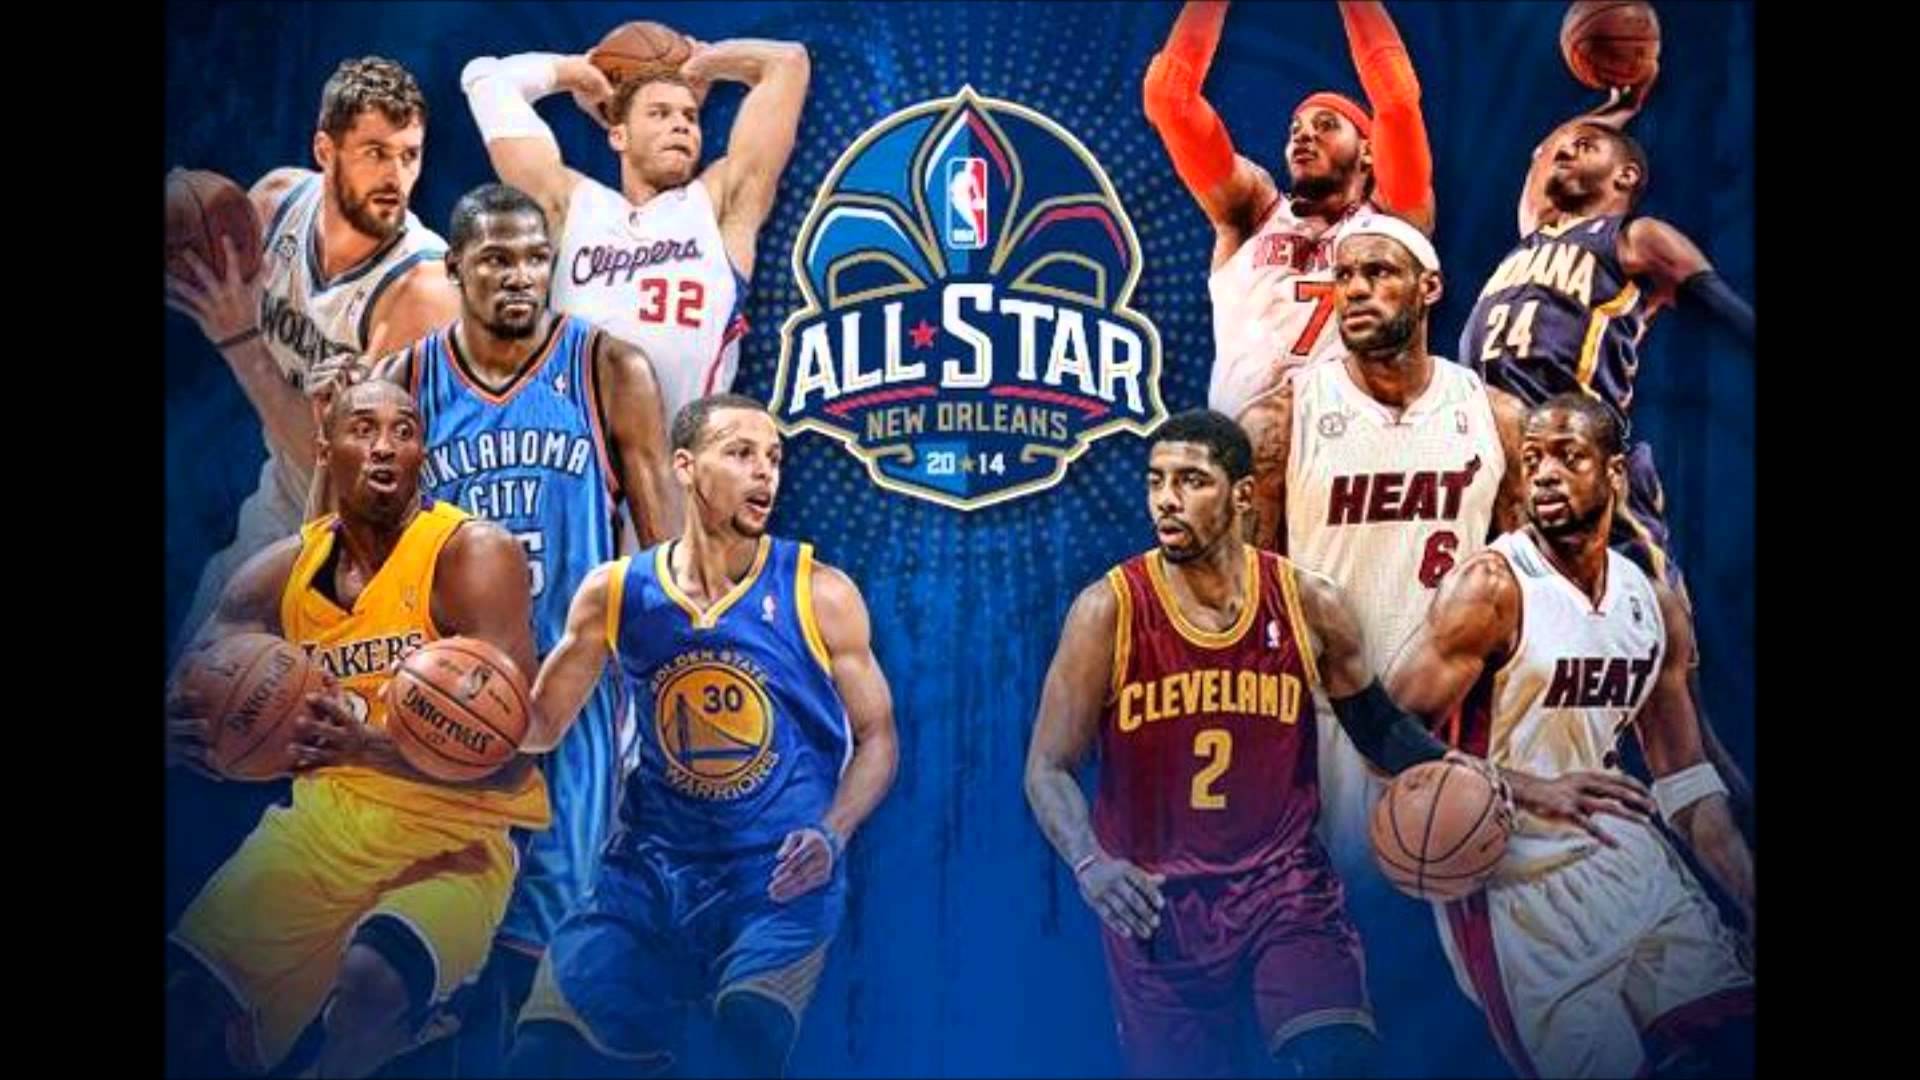 Free Download Nba 14 All Star Game Starters East West 19x1080 For Your Desktop Mobile Tablet Explore 45 Nba Wallpaper 14 15 Nba Wallpaper For Computer Nba Live Wallpaper Nba Finals 15 Wallpaper